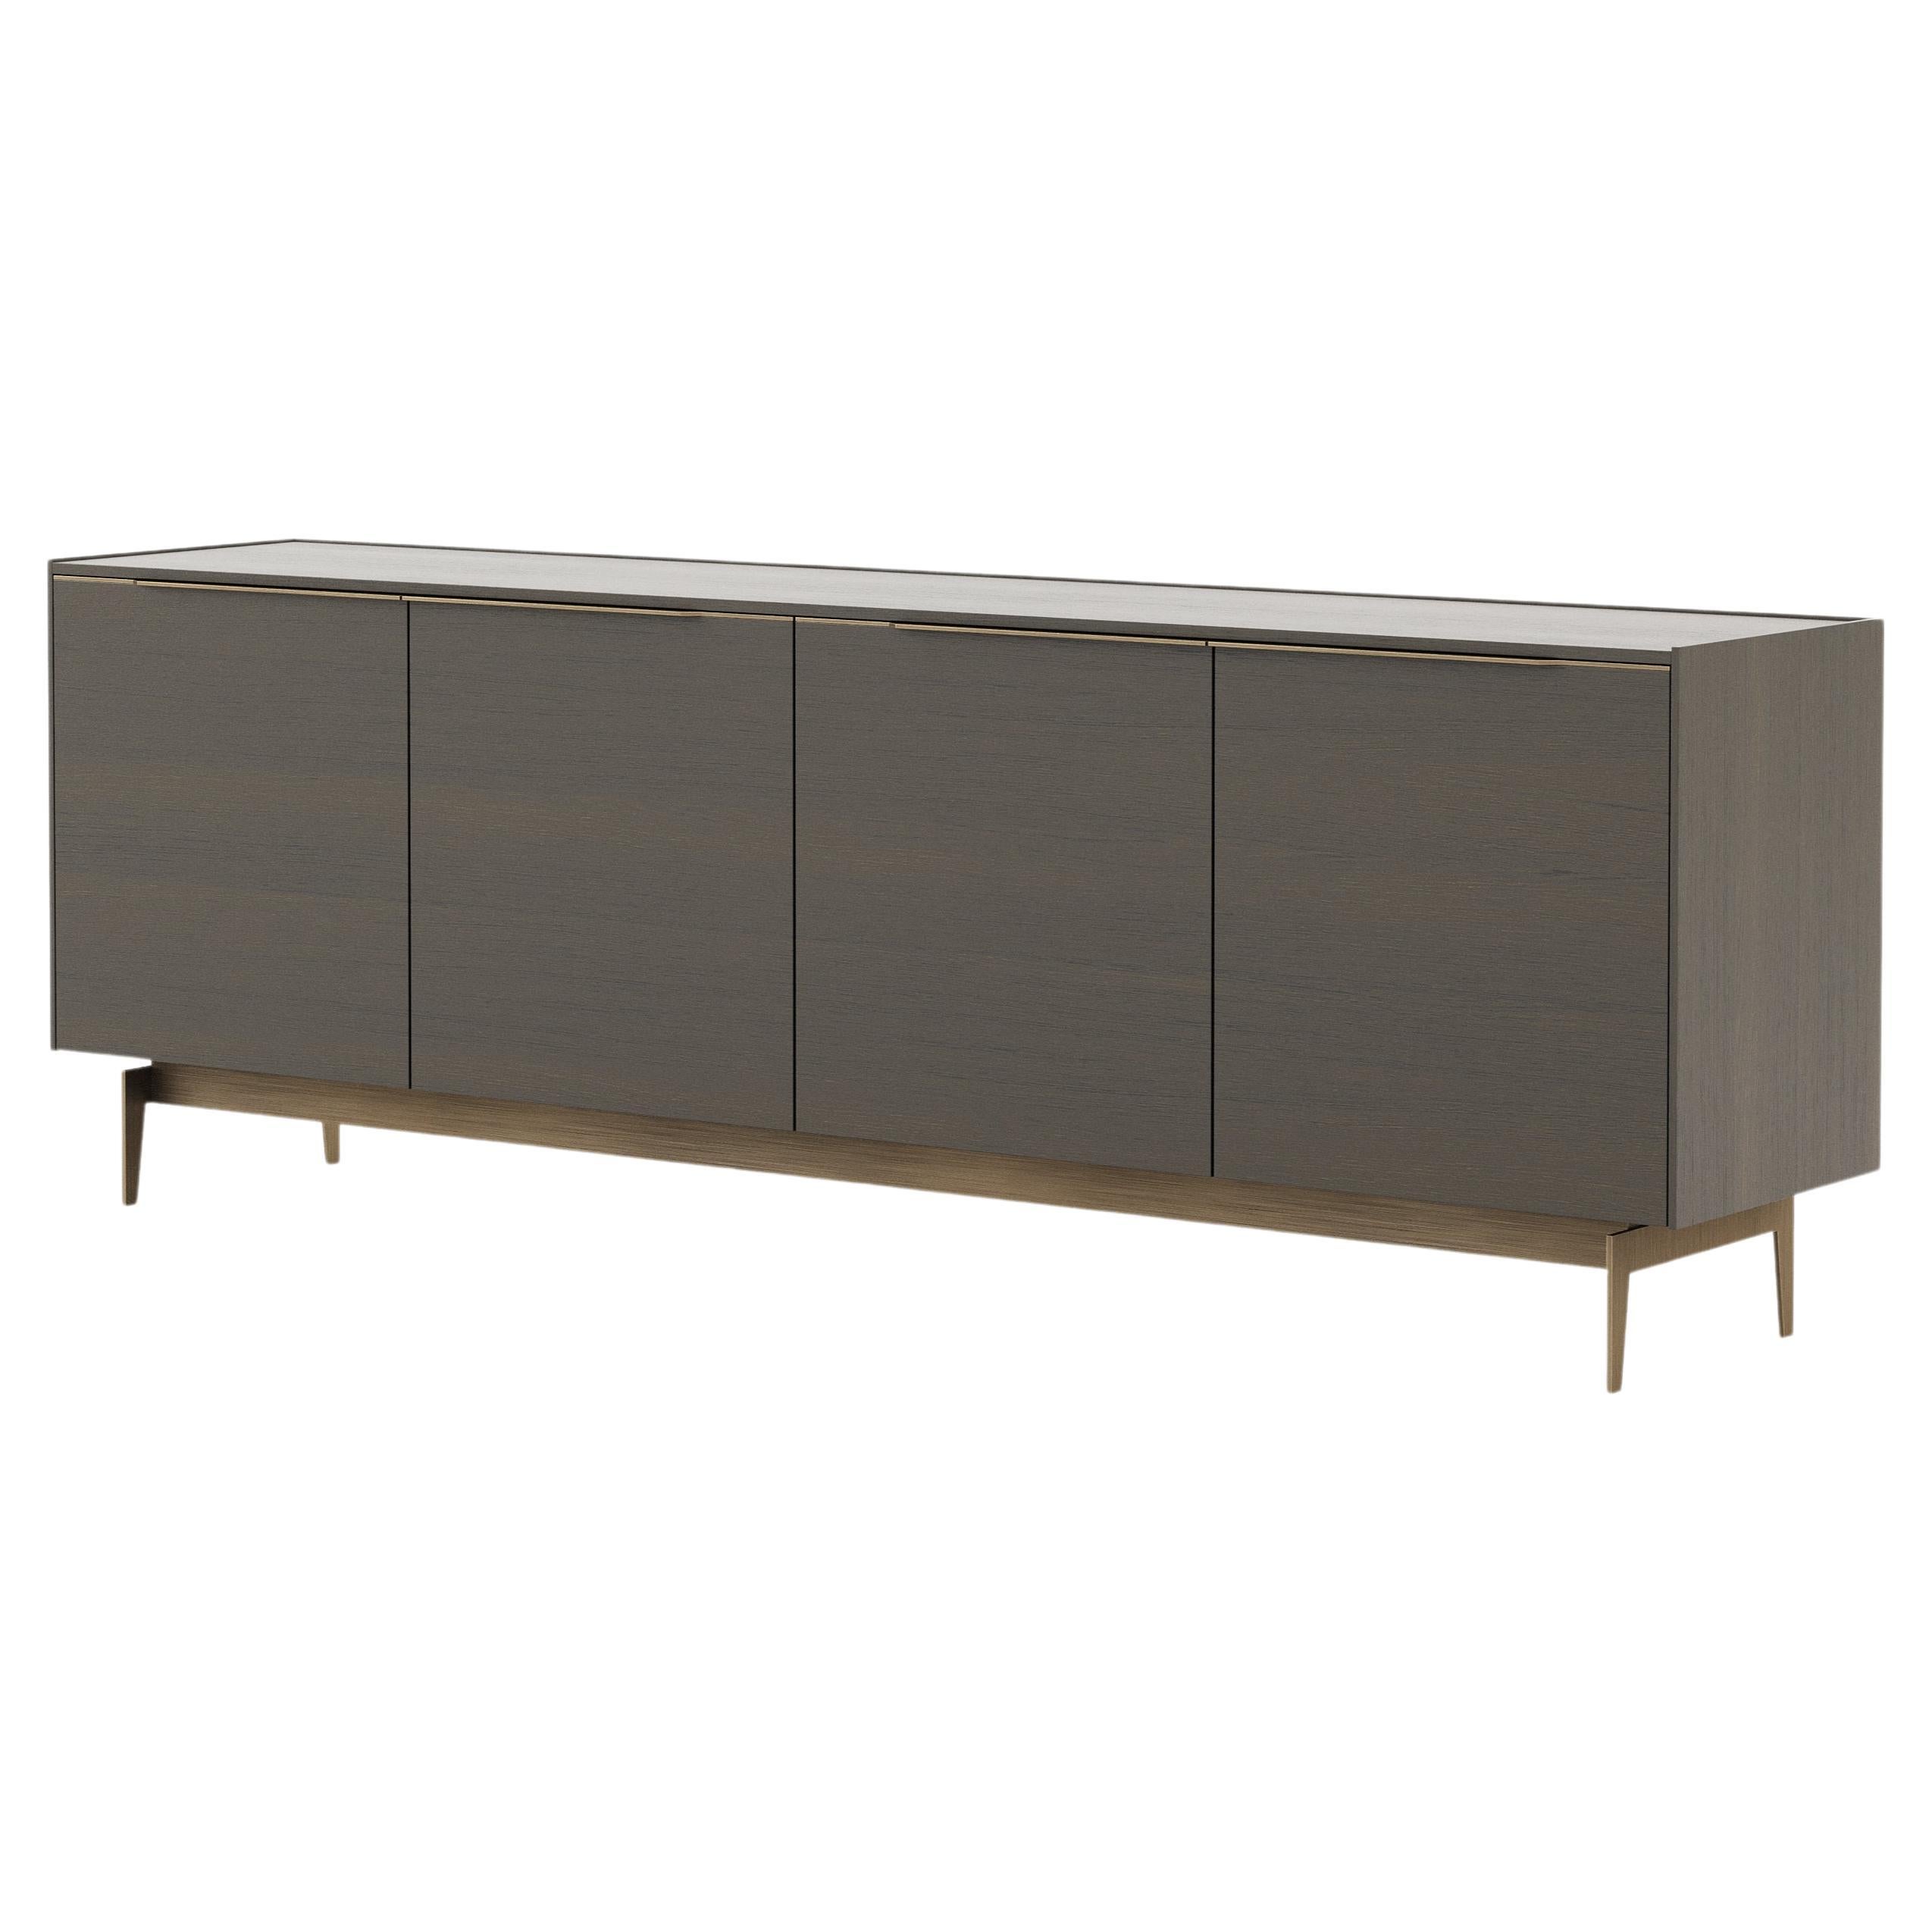 Scandinavian Modern Landform Sideboard Made with Oak and Iron by Stylish Club For Sale